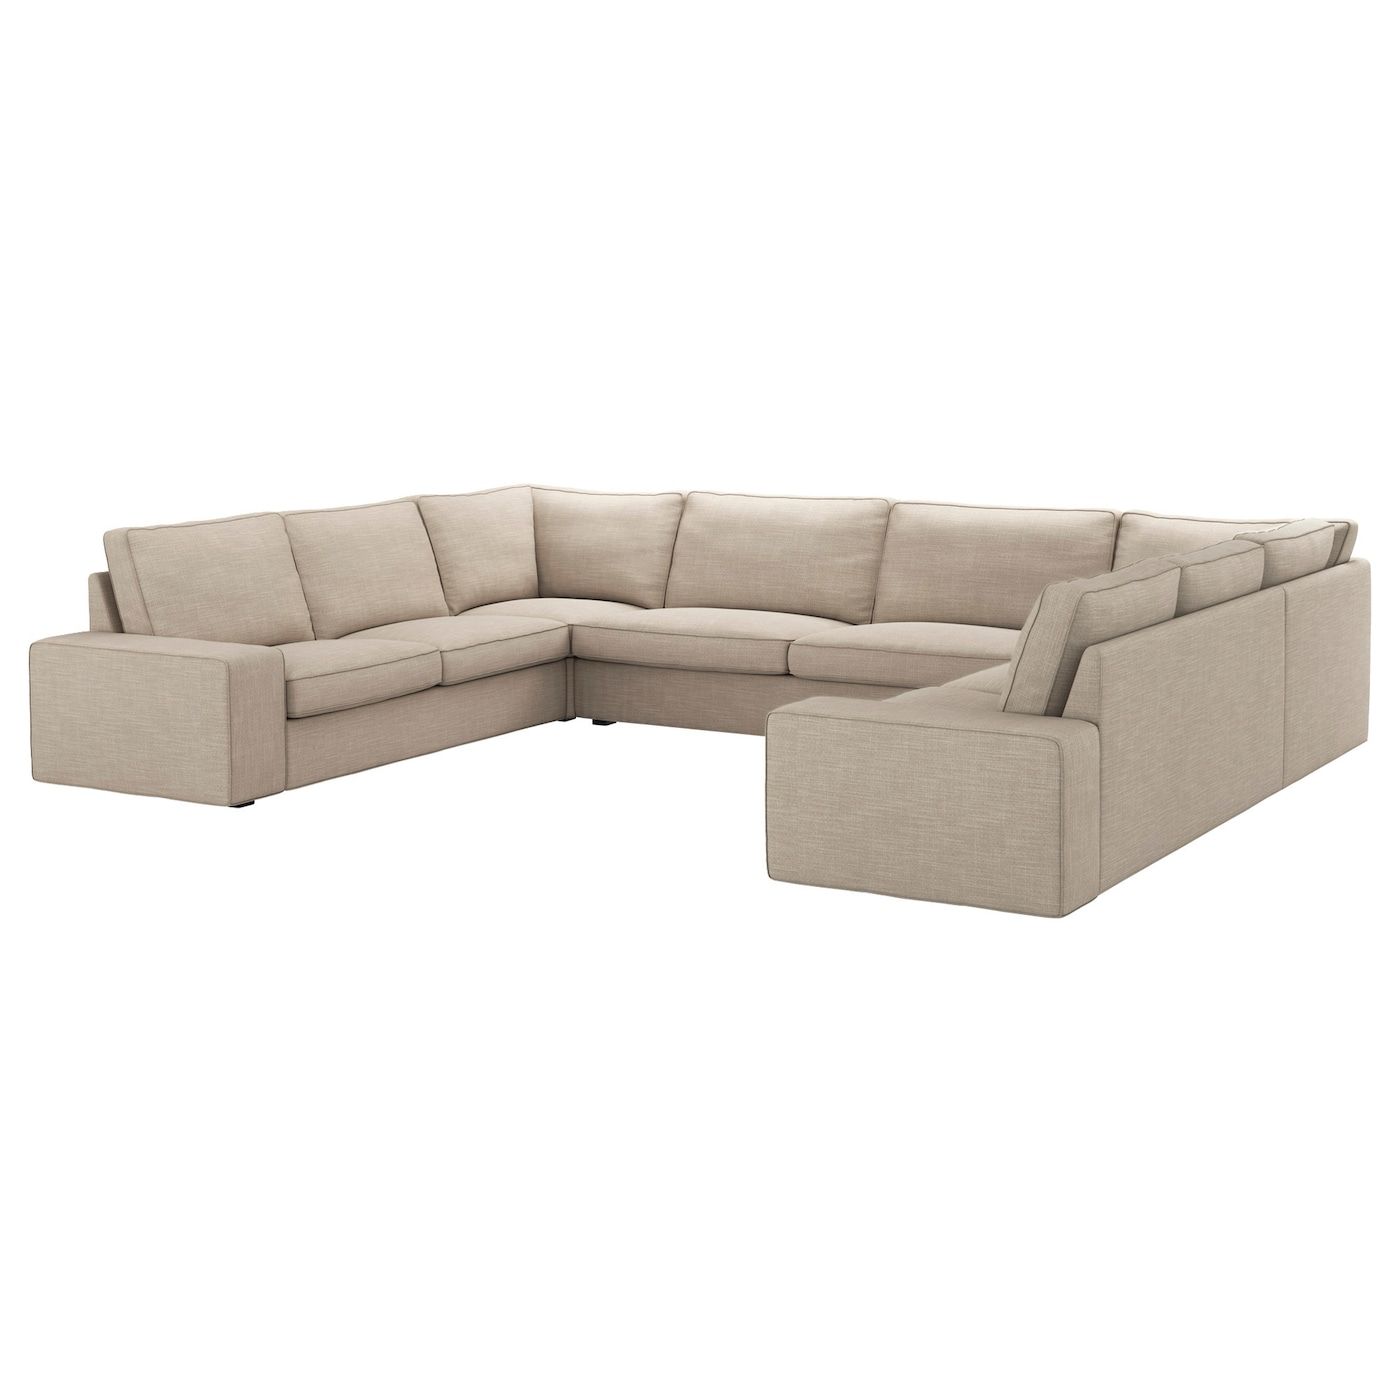 Featured Photo of 20 Inspirations U Shaped Couches in Beige